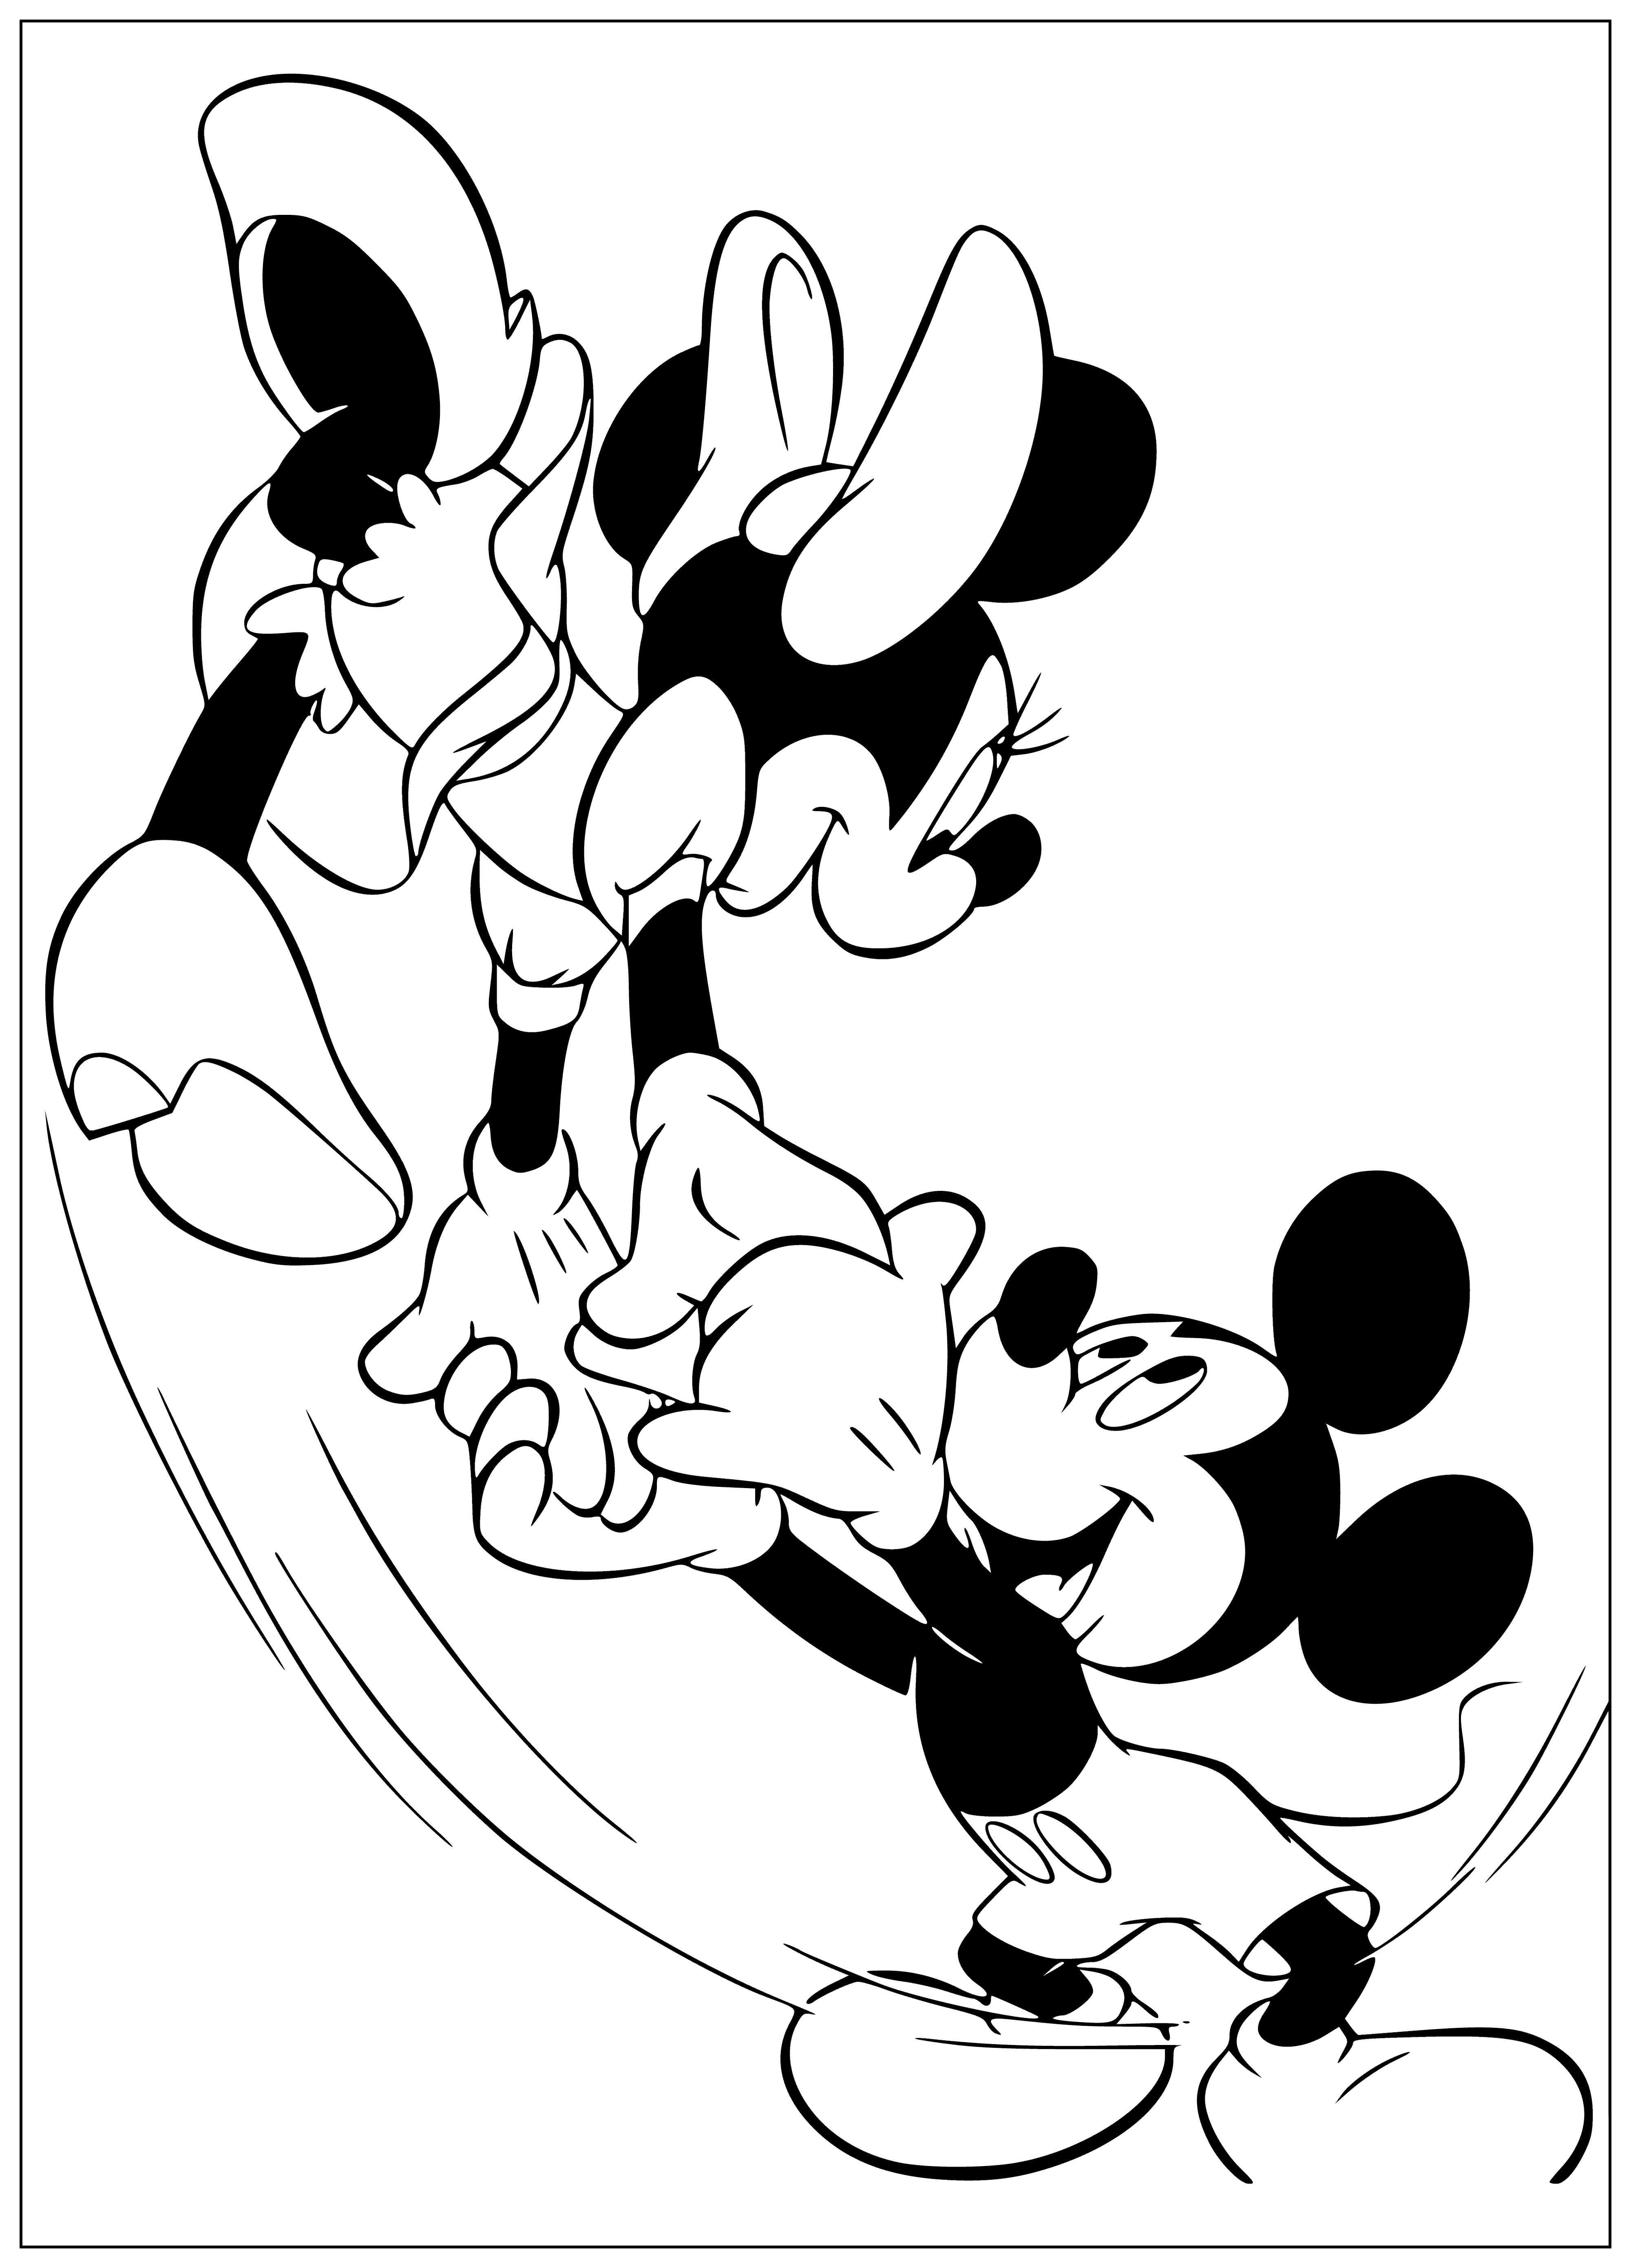 coloring page: Four classic Disney characters—Mickey, Donald, Pluto, & Goofy—are dancing with a group of people in an unknown colored background.